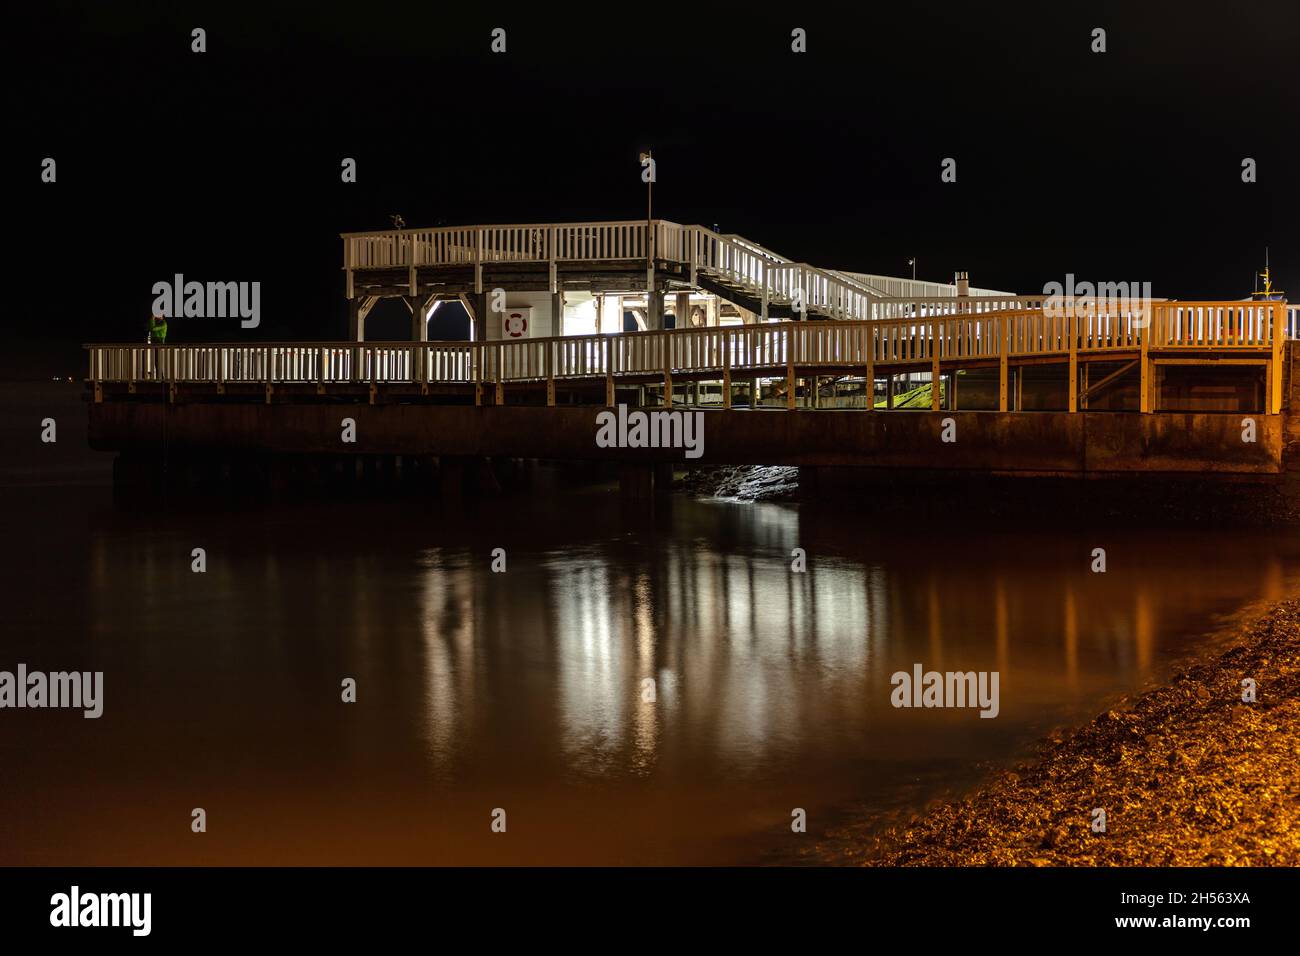 ‘Alte Liebe’ (‘Old Love’), famous observation deck in Cuxhaven, Germany at the river Elbe at night Stock Photo